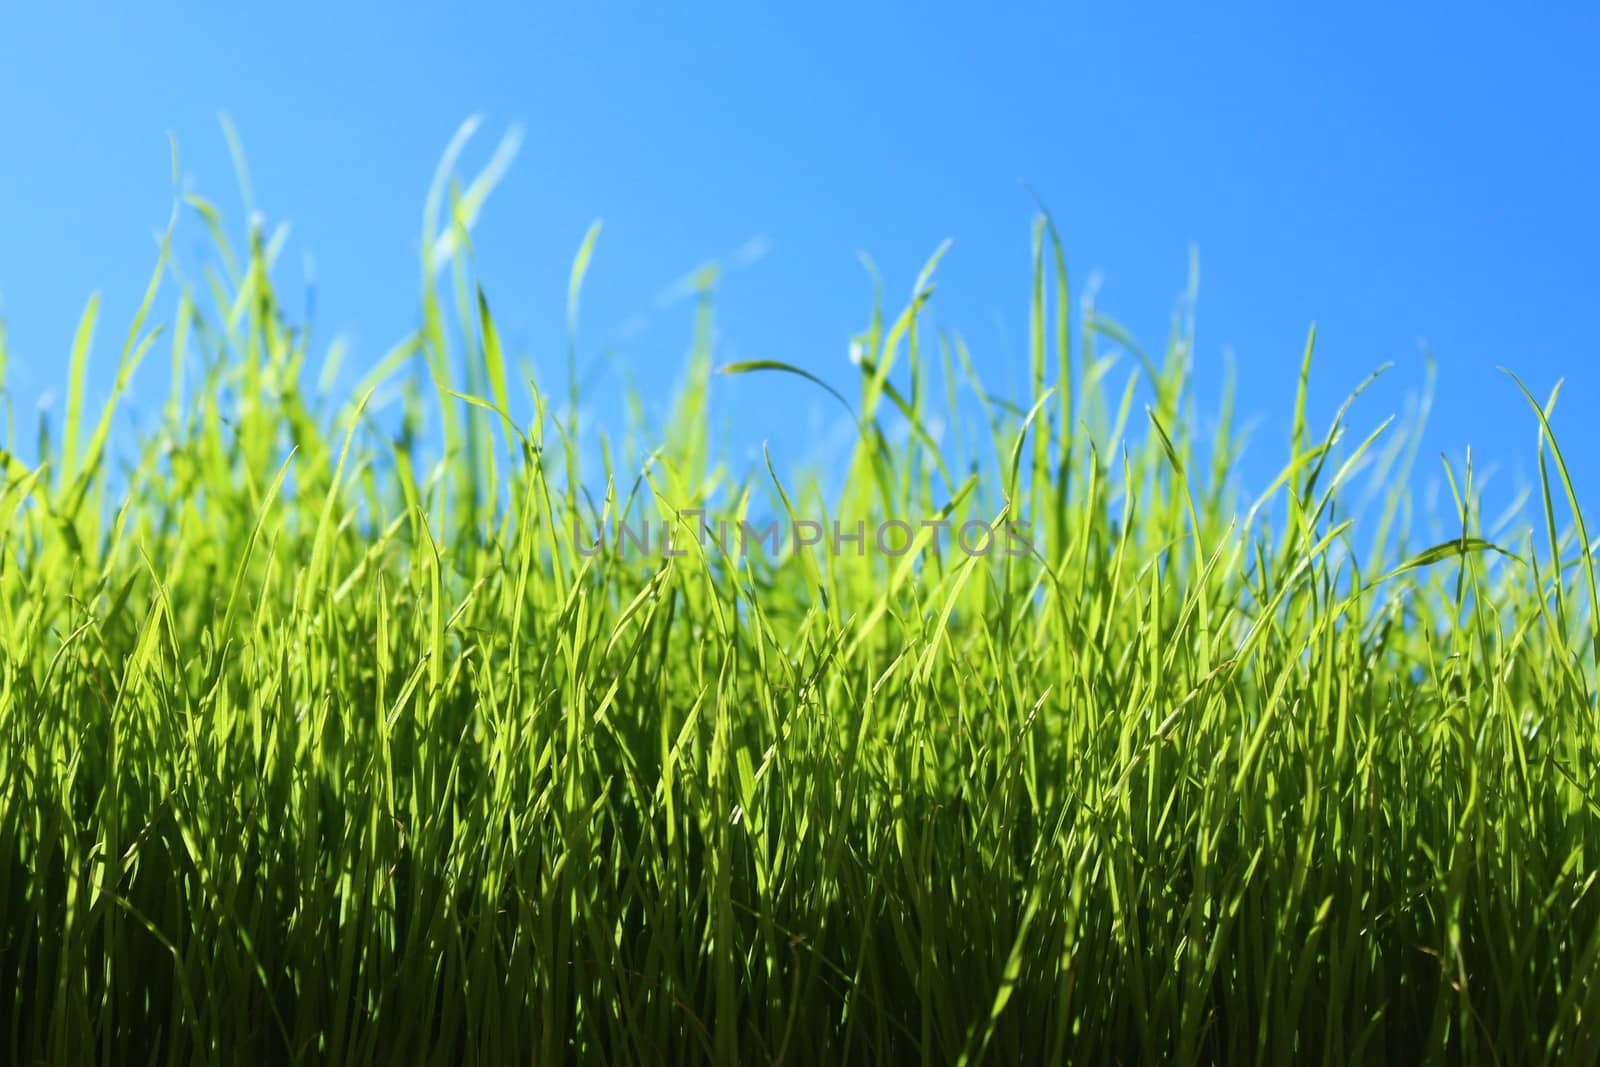 grass in front of the green cloudless sky by martina_unbehauen